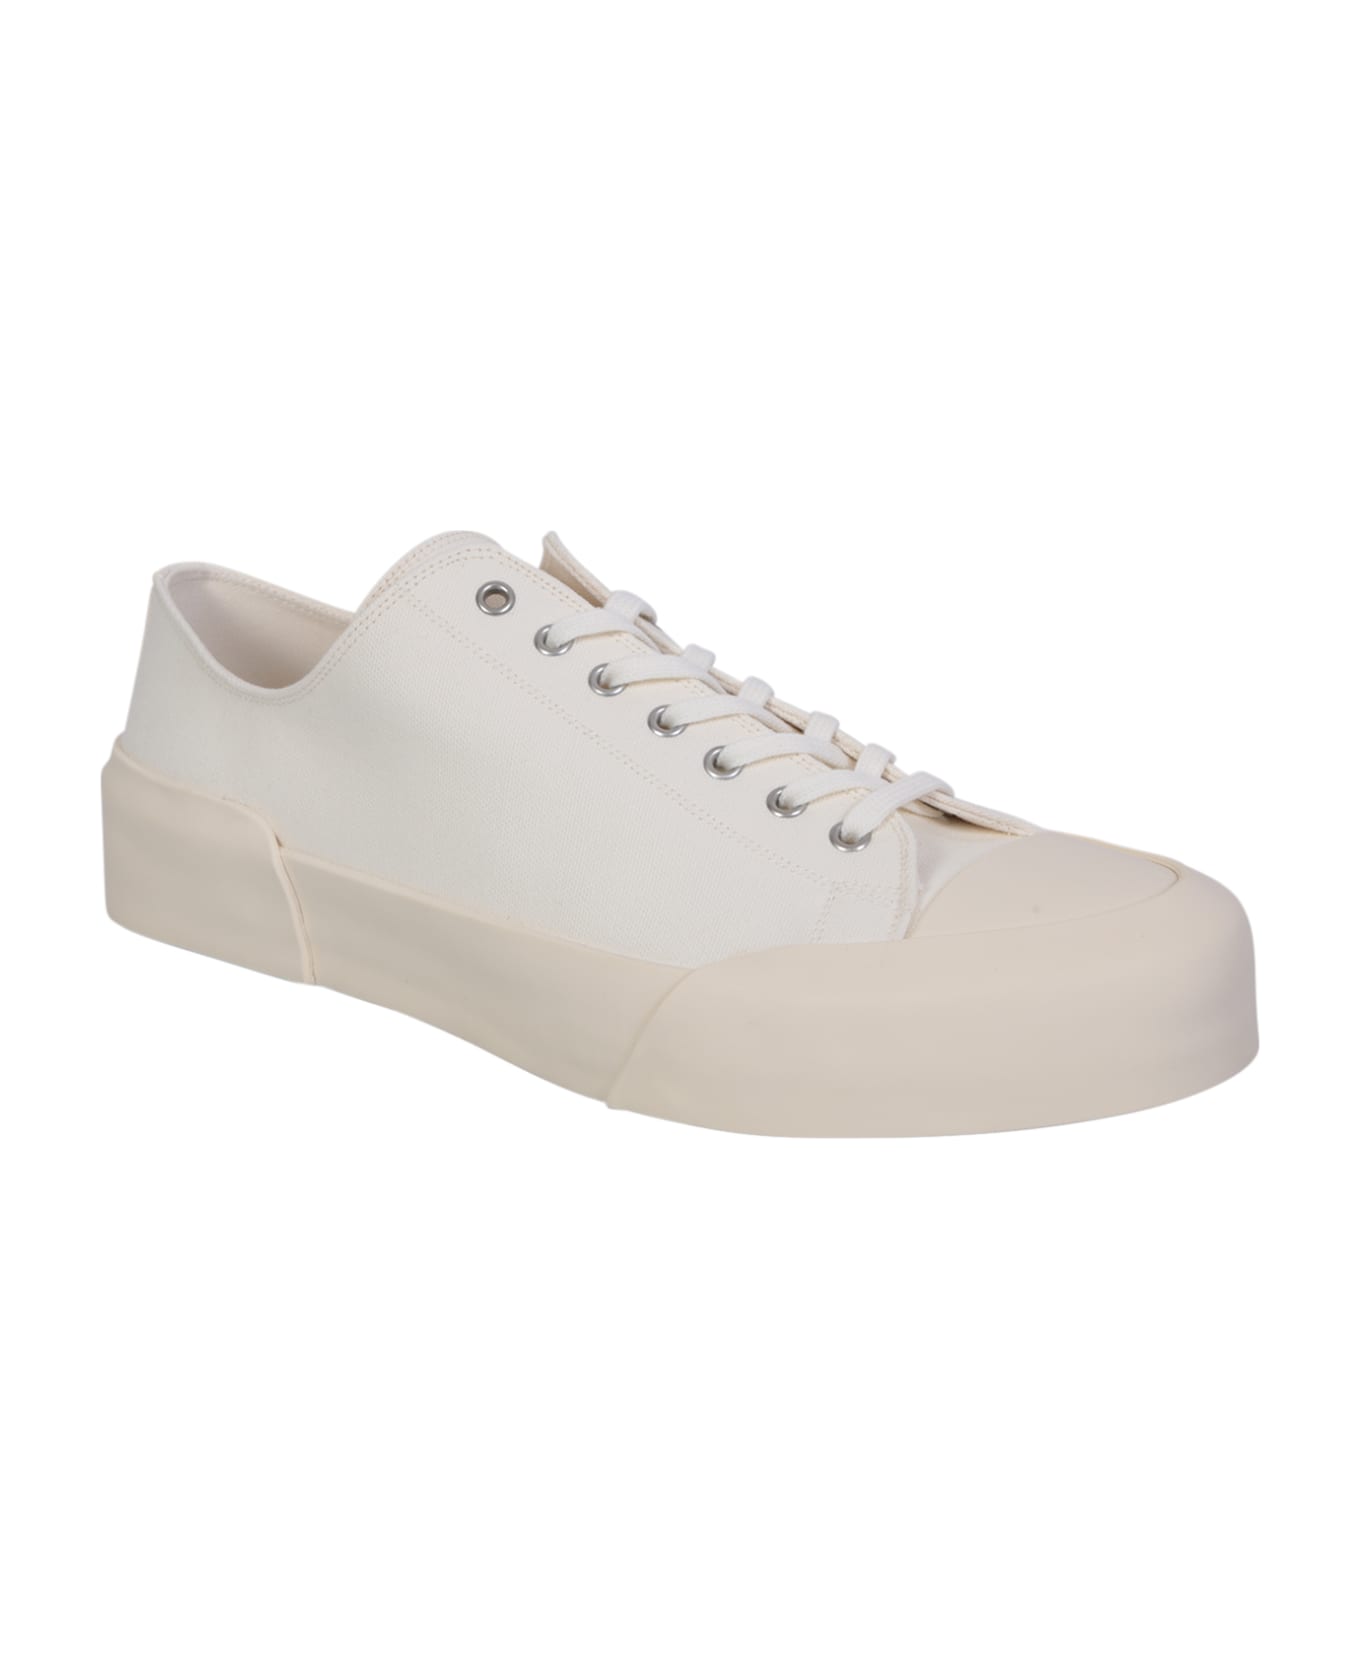 Jil Sander Lace-up Low White Sneakers - White スニーカー